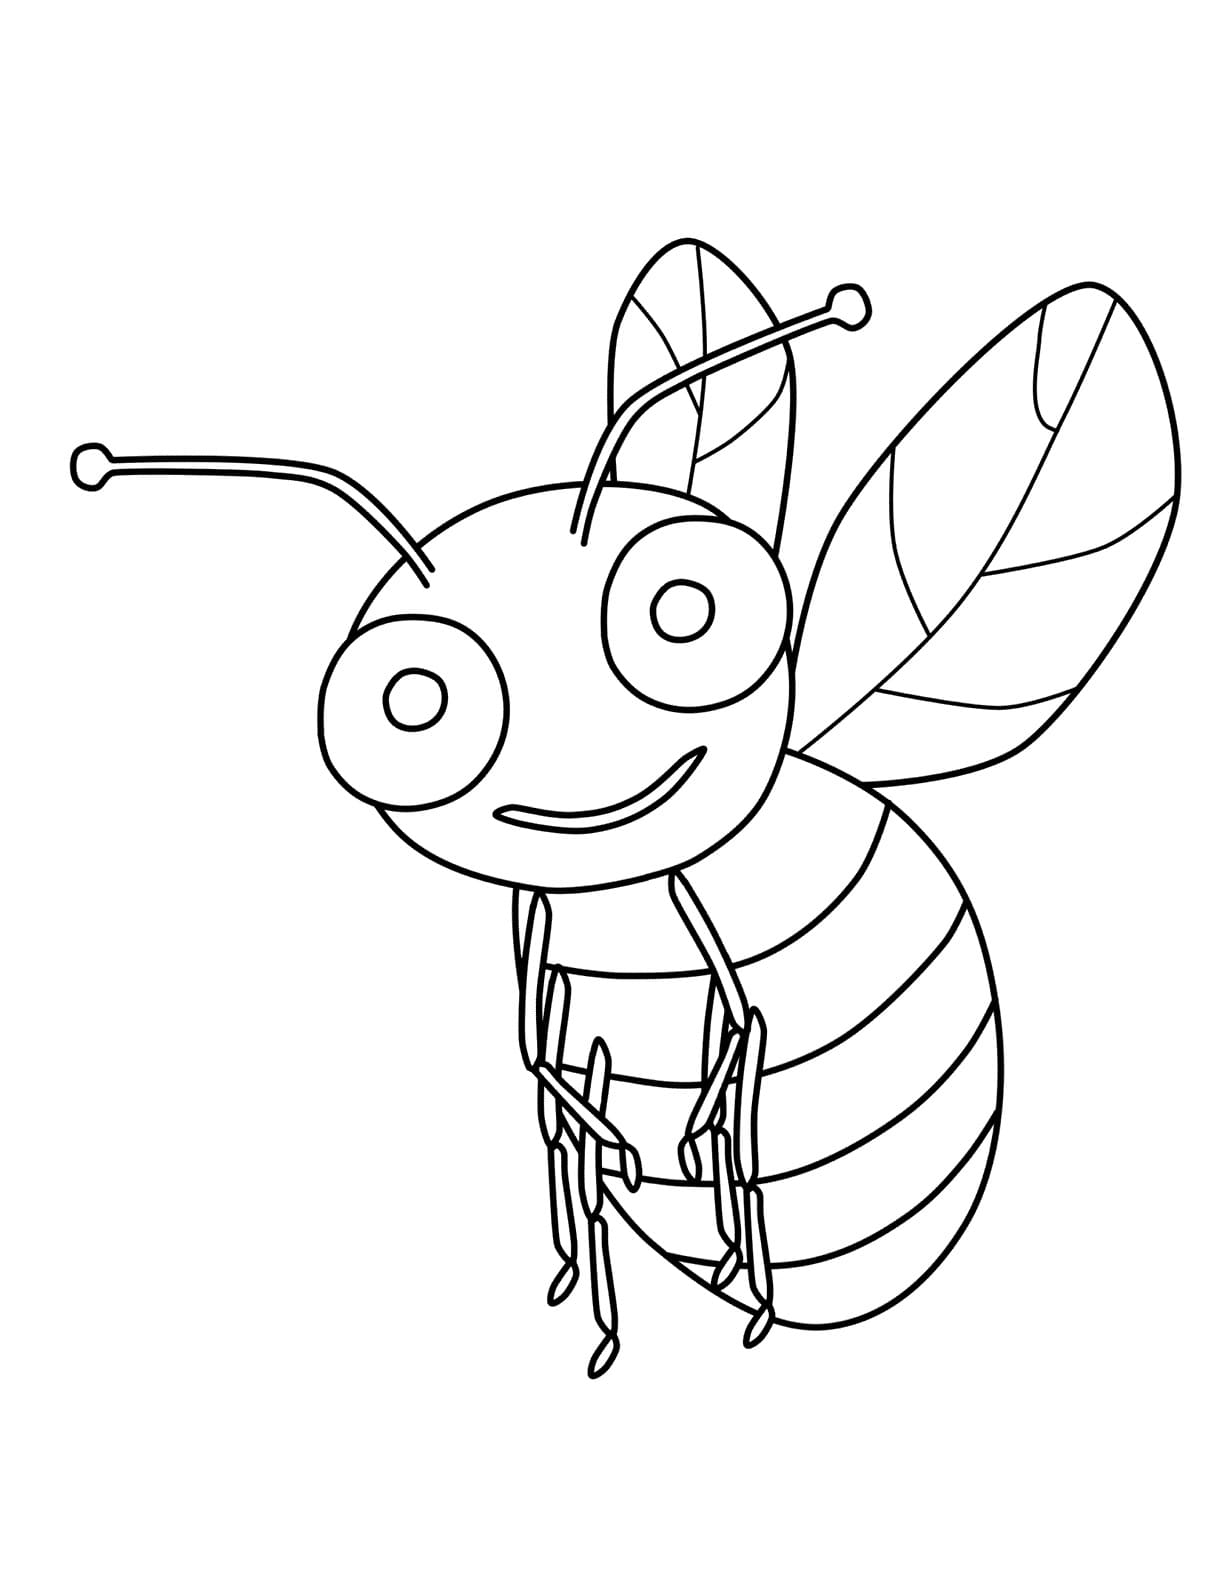 a-cartoon-bee-coloring-page-download-print-or-color-online-for-free